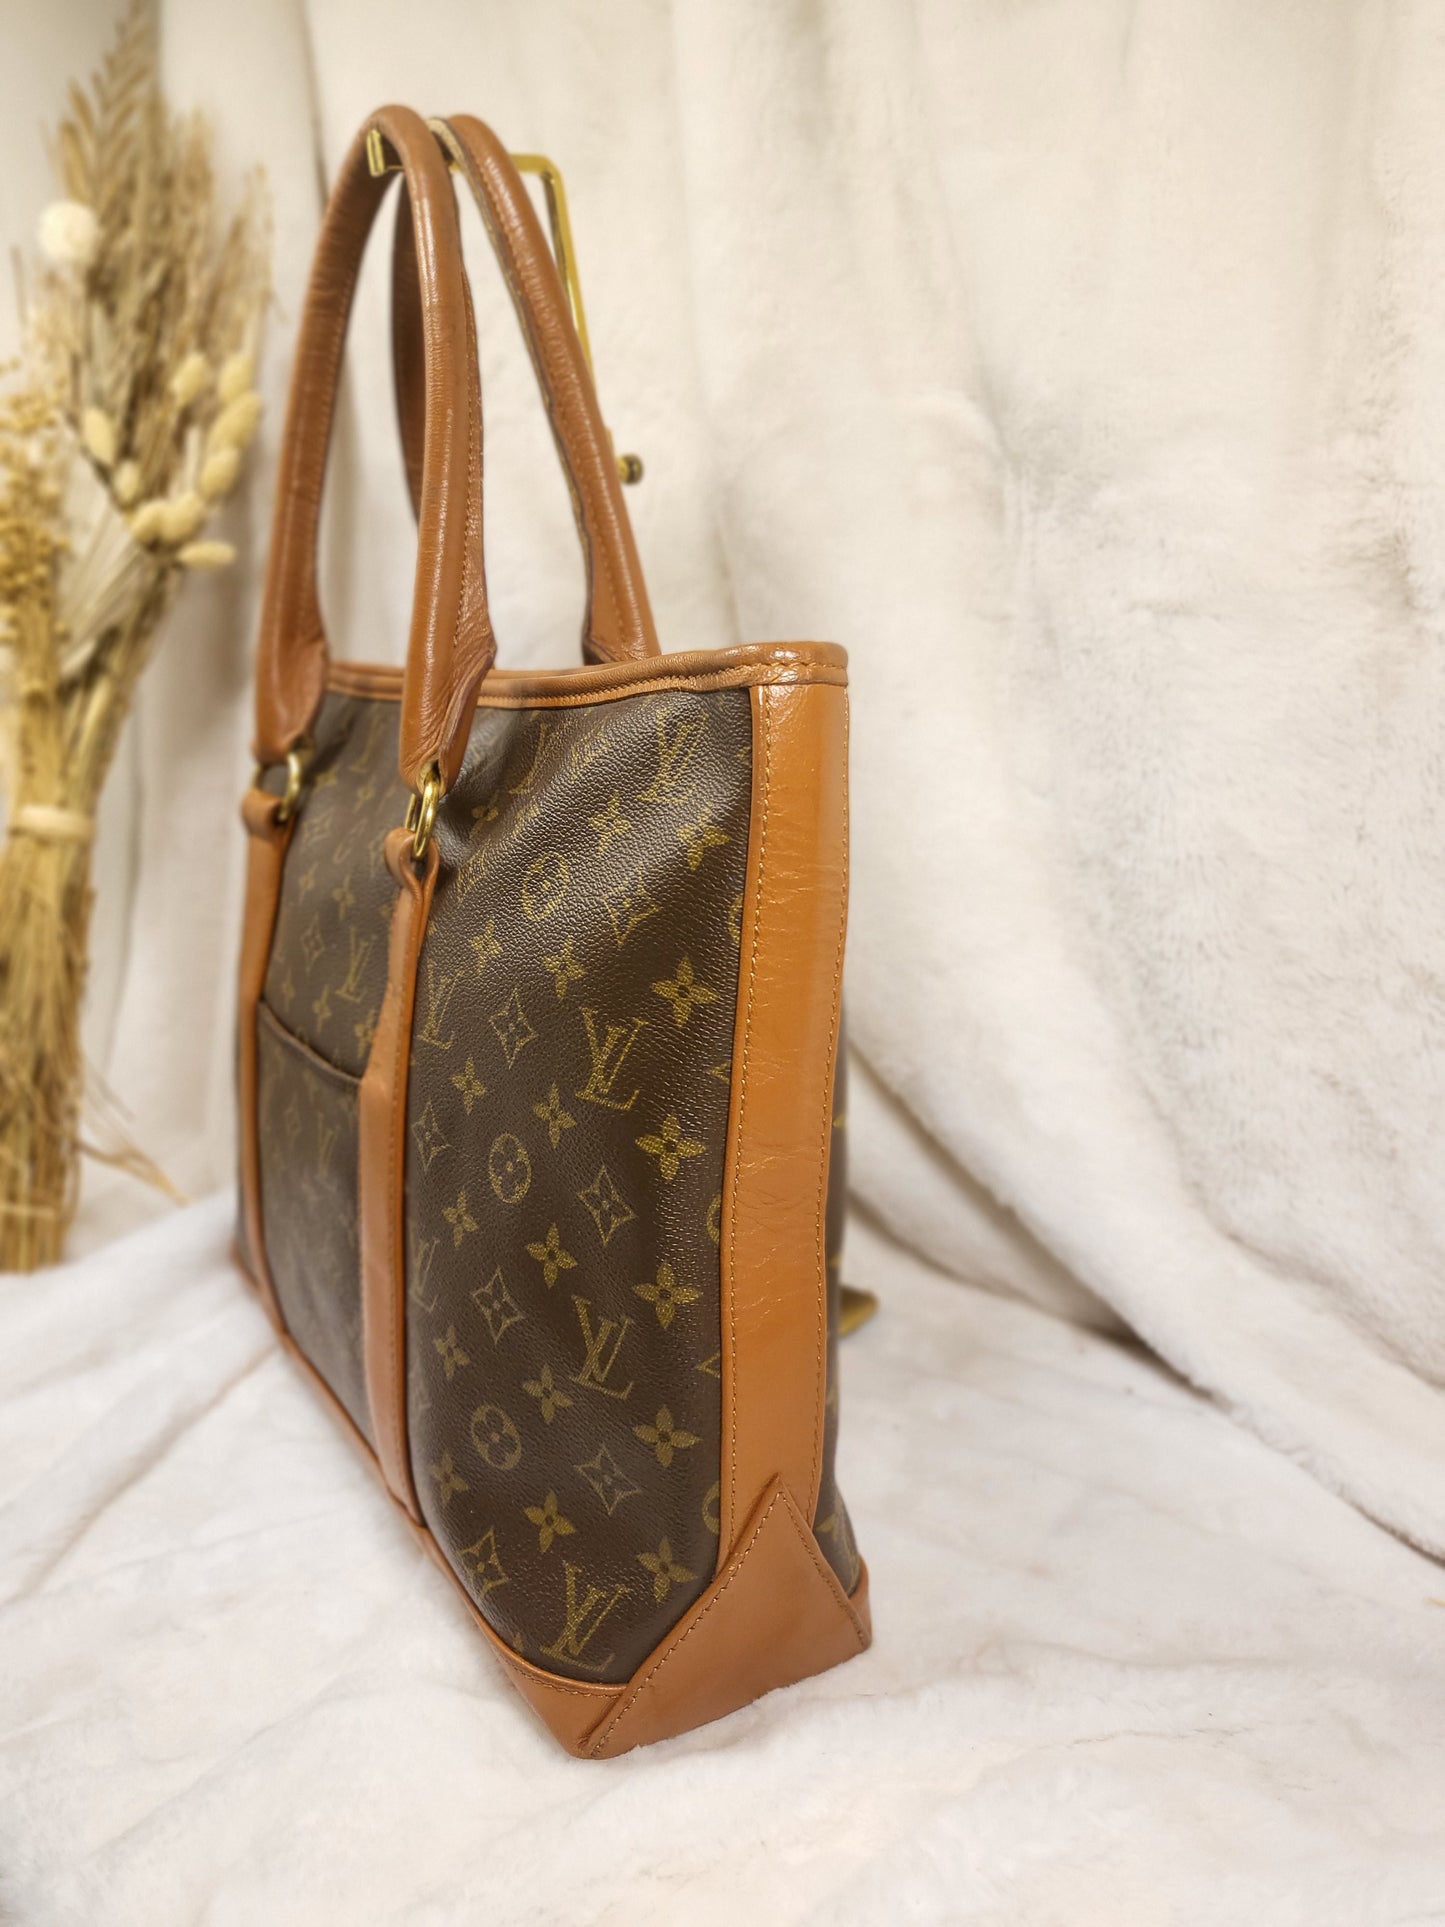 Authentic pre-owned Louis Vuitton Weekend pm tote shoulder bag